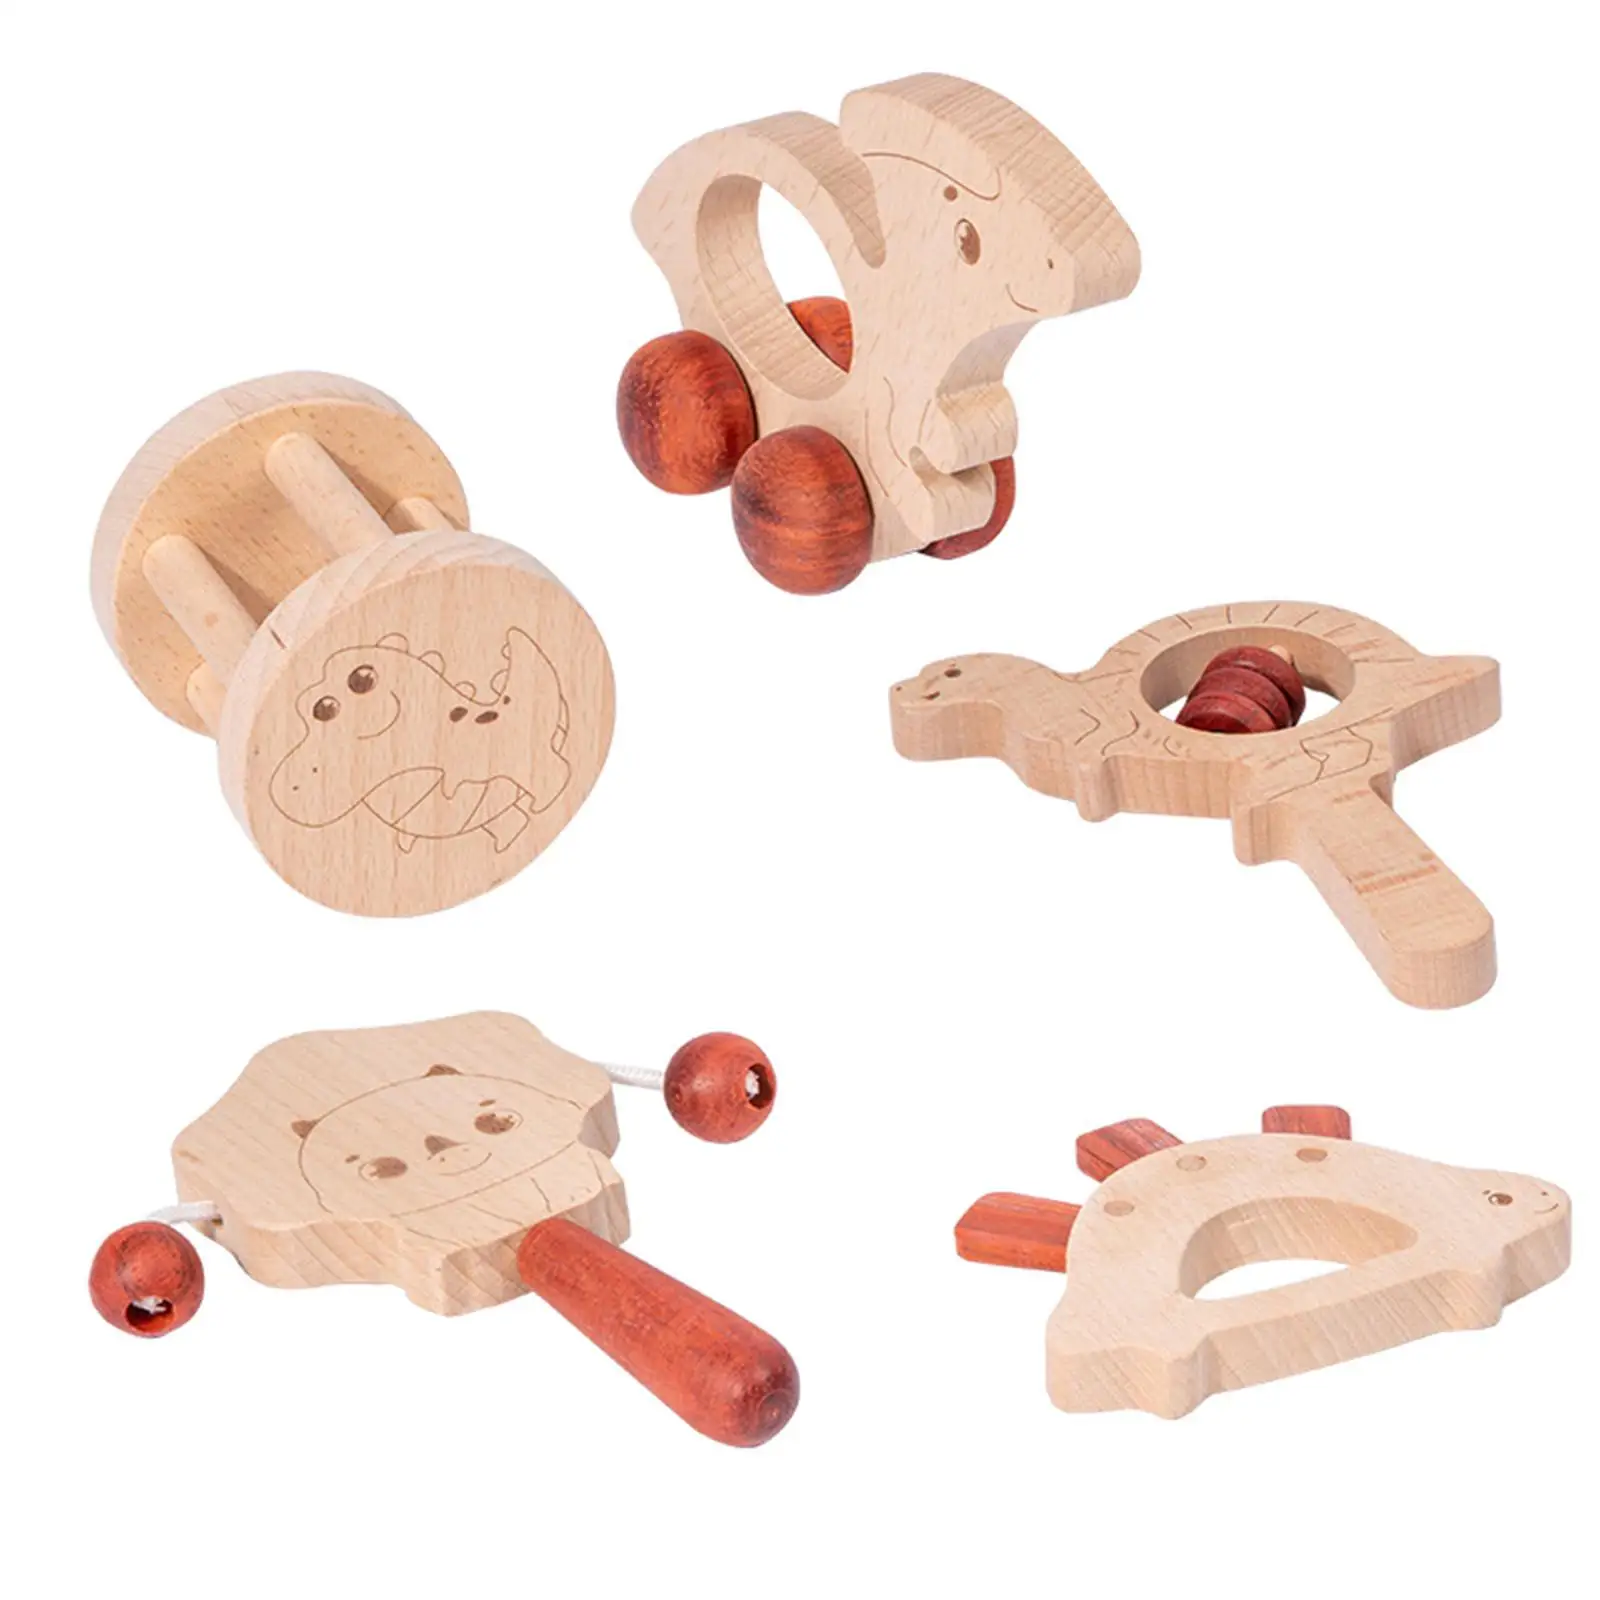 5x Wooden Baby Toy Set Montessori Toys Car Handmade Sensory Development Baby Rattle Wood Toy Rattles for Babies 6-12 Months